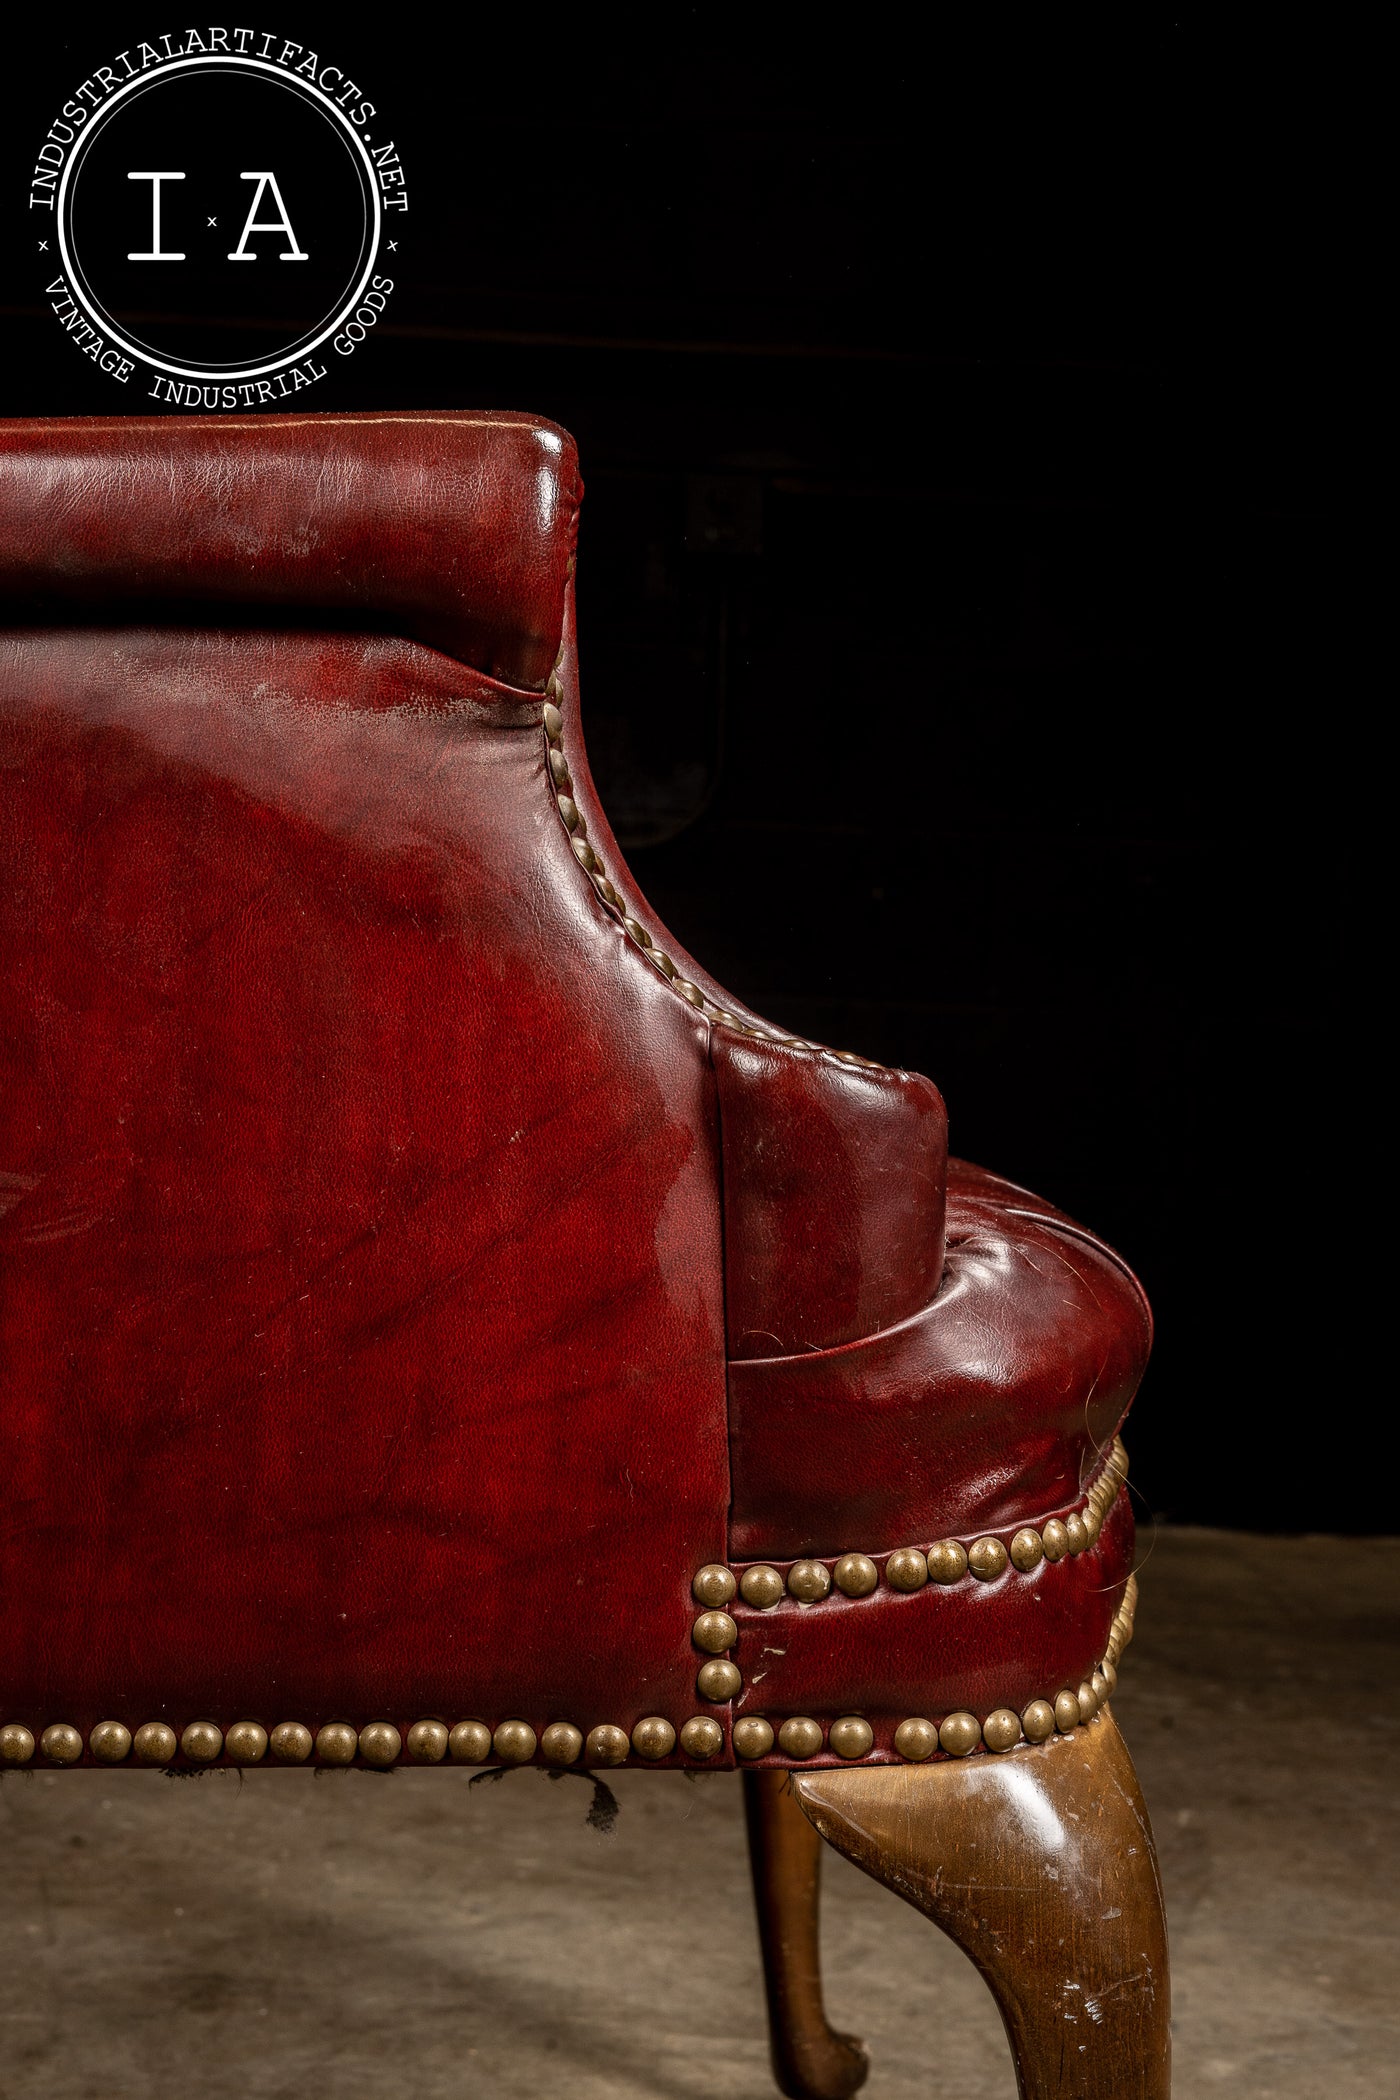 Vintage Tufted Leather Chesterfield Armchair in Burgundy